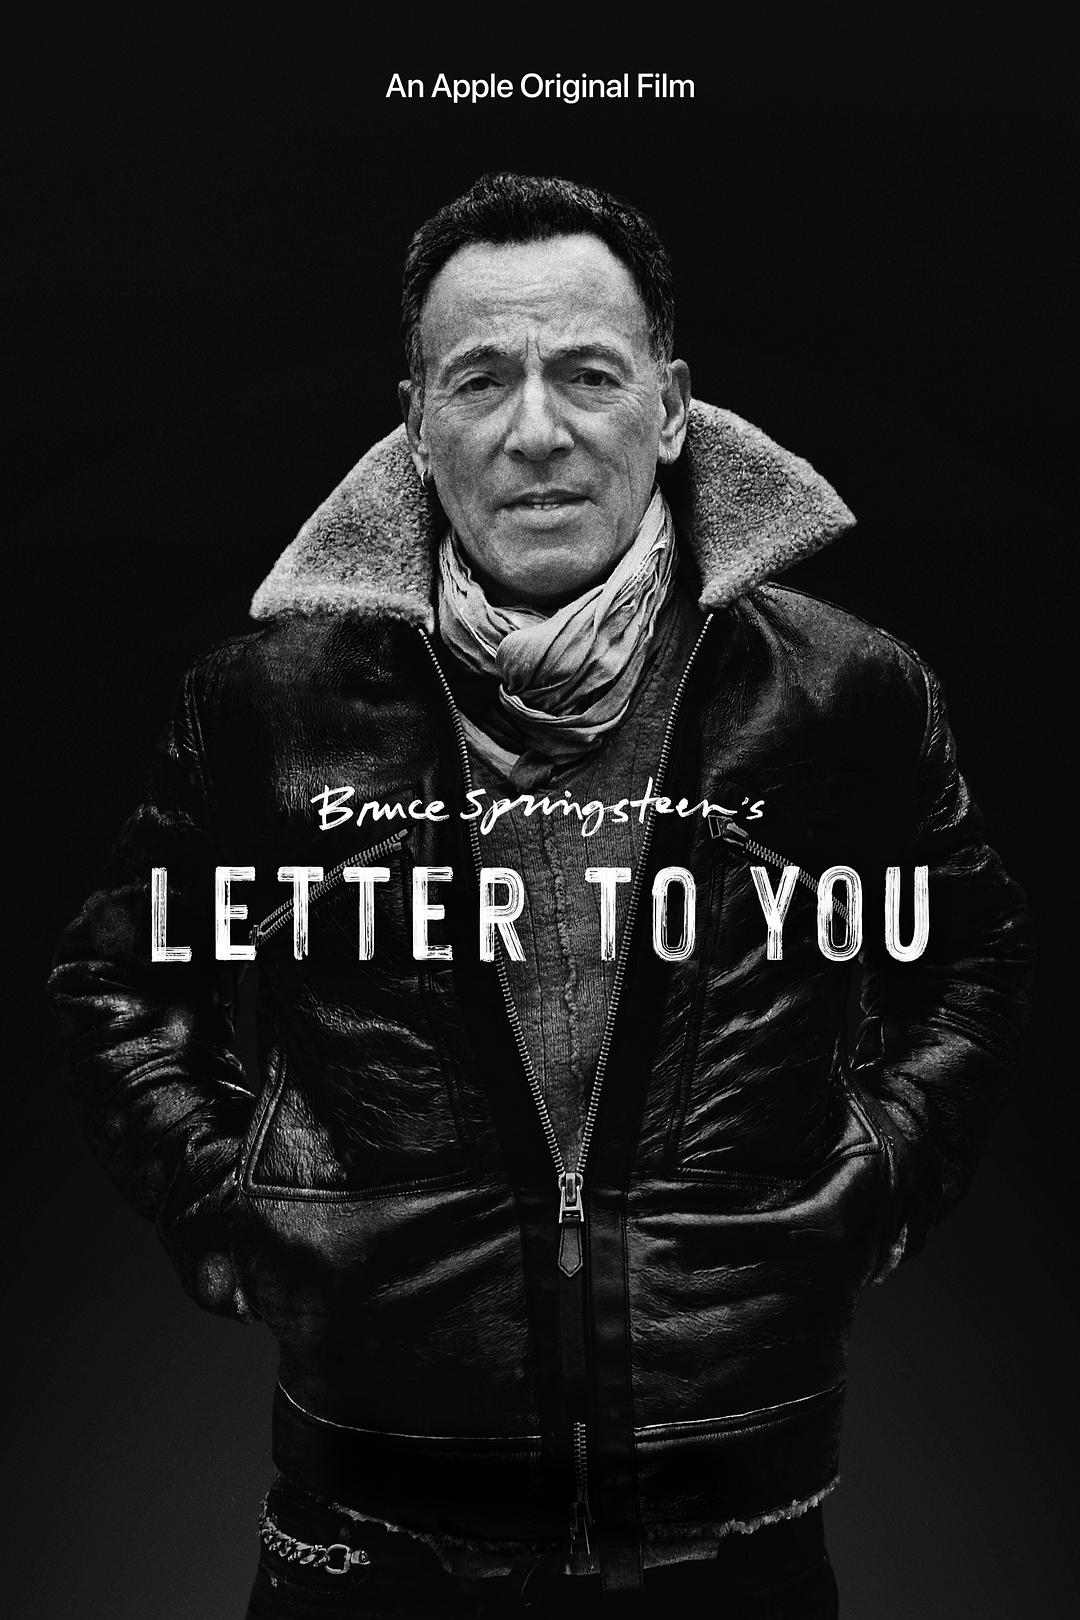 ³˹˹˹͡: Bruce.Springsteen.Letter.To.You.2020.2160p.WEB.h265-KOGi 13.03GB